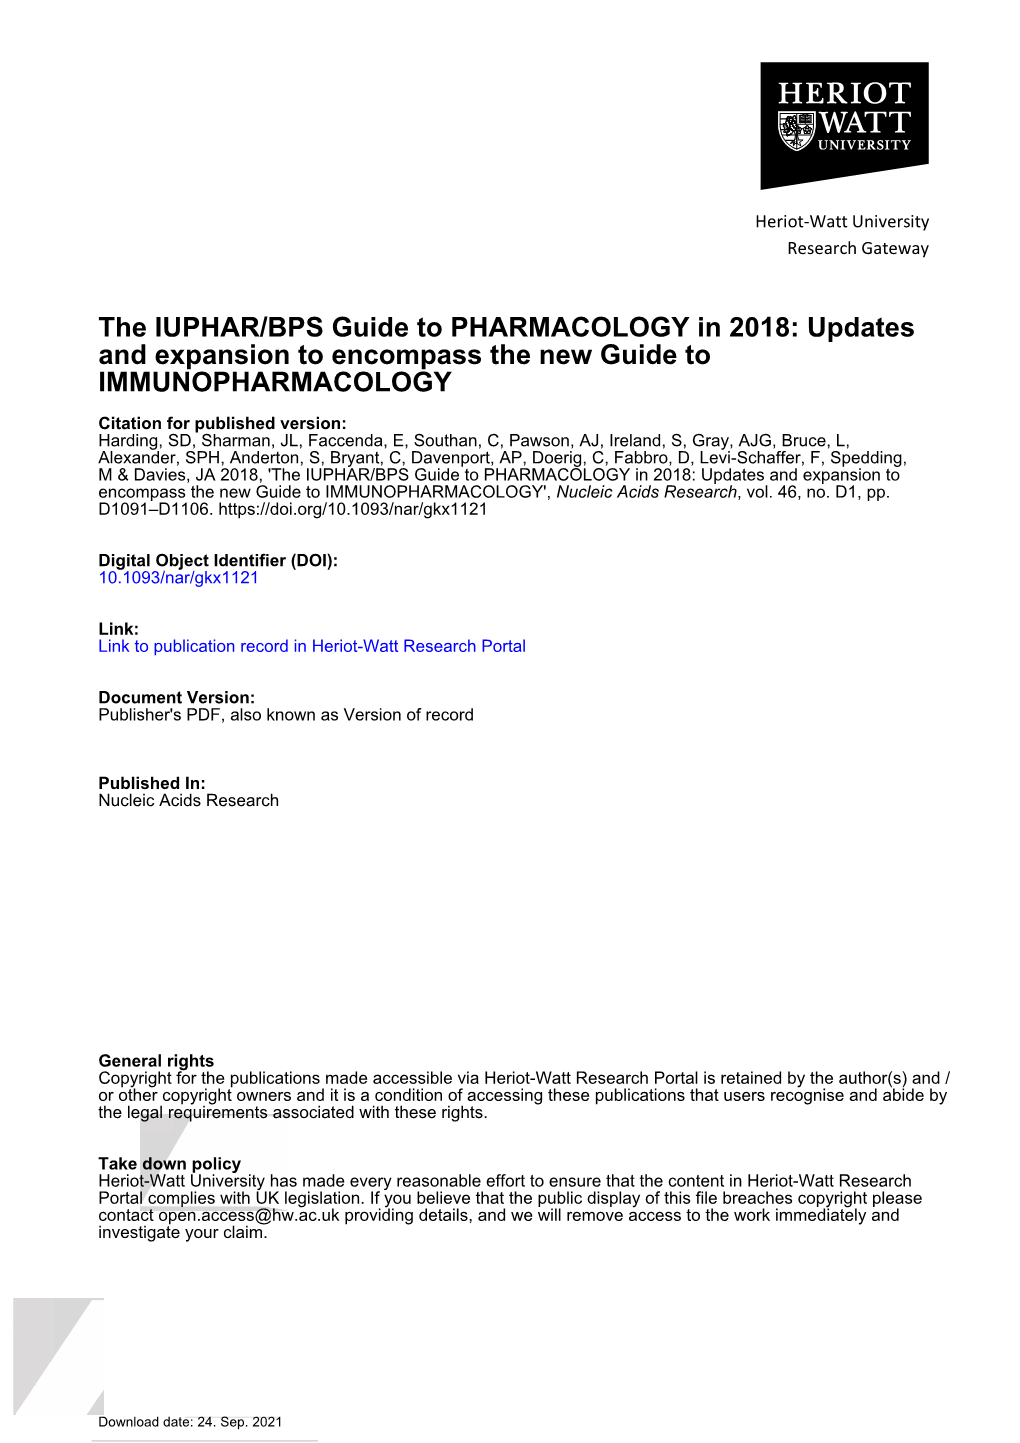 The IUPHAR/BPS Guide to PHARMACOLOGY in 2018: Updates and Expansion to Encompass the New Guide to IMMUNOPHARMACOLOGY